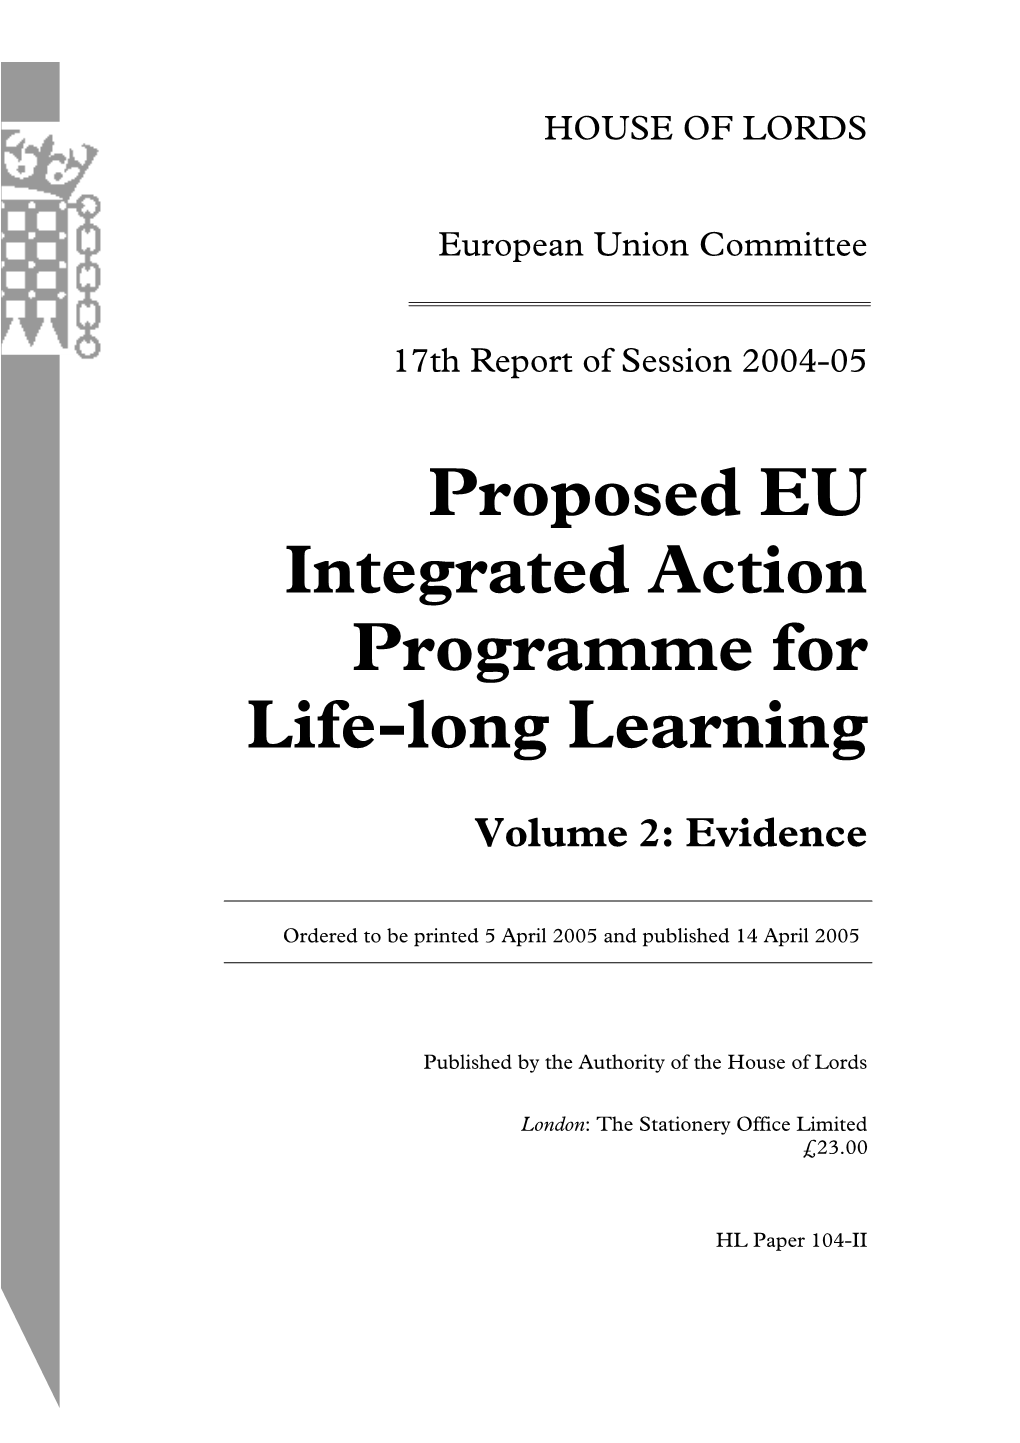 Proposed EU Integrated Action Programme for Life-Long Learning